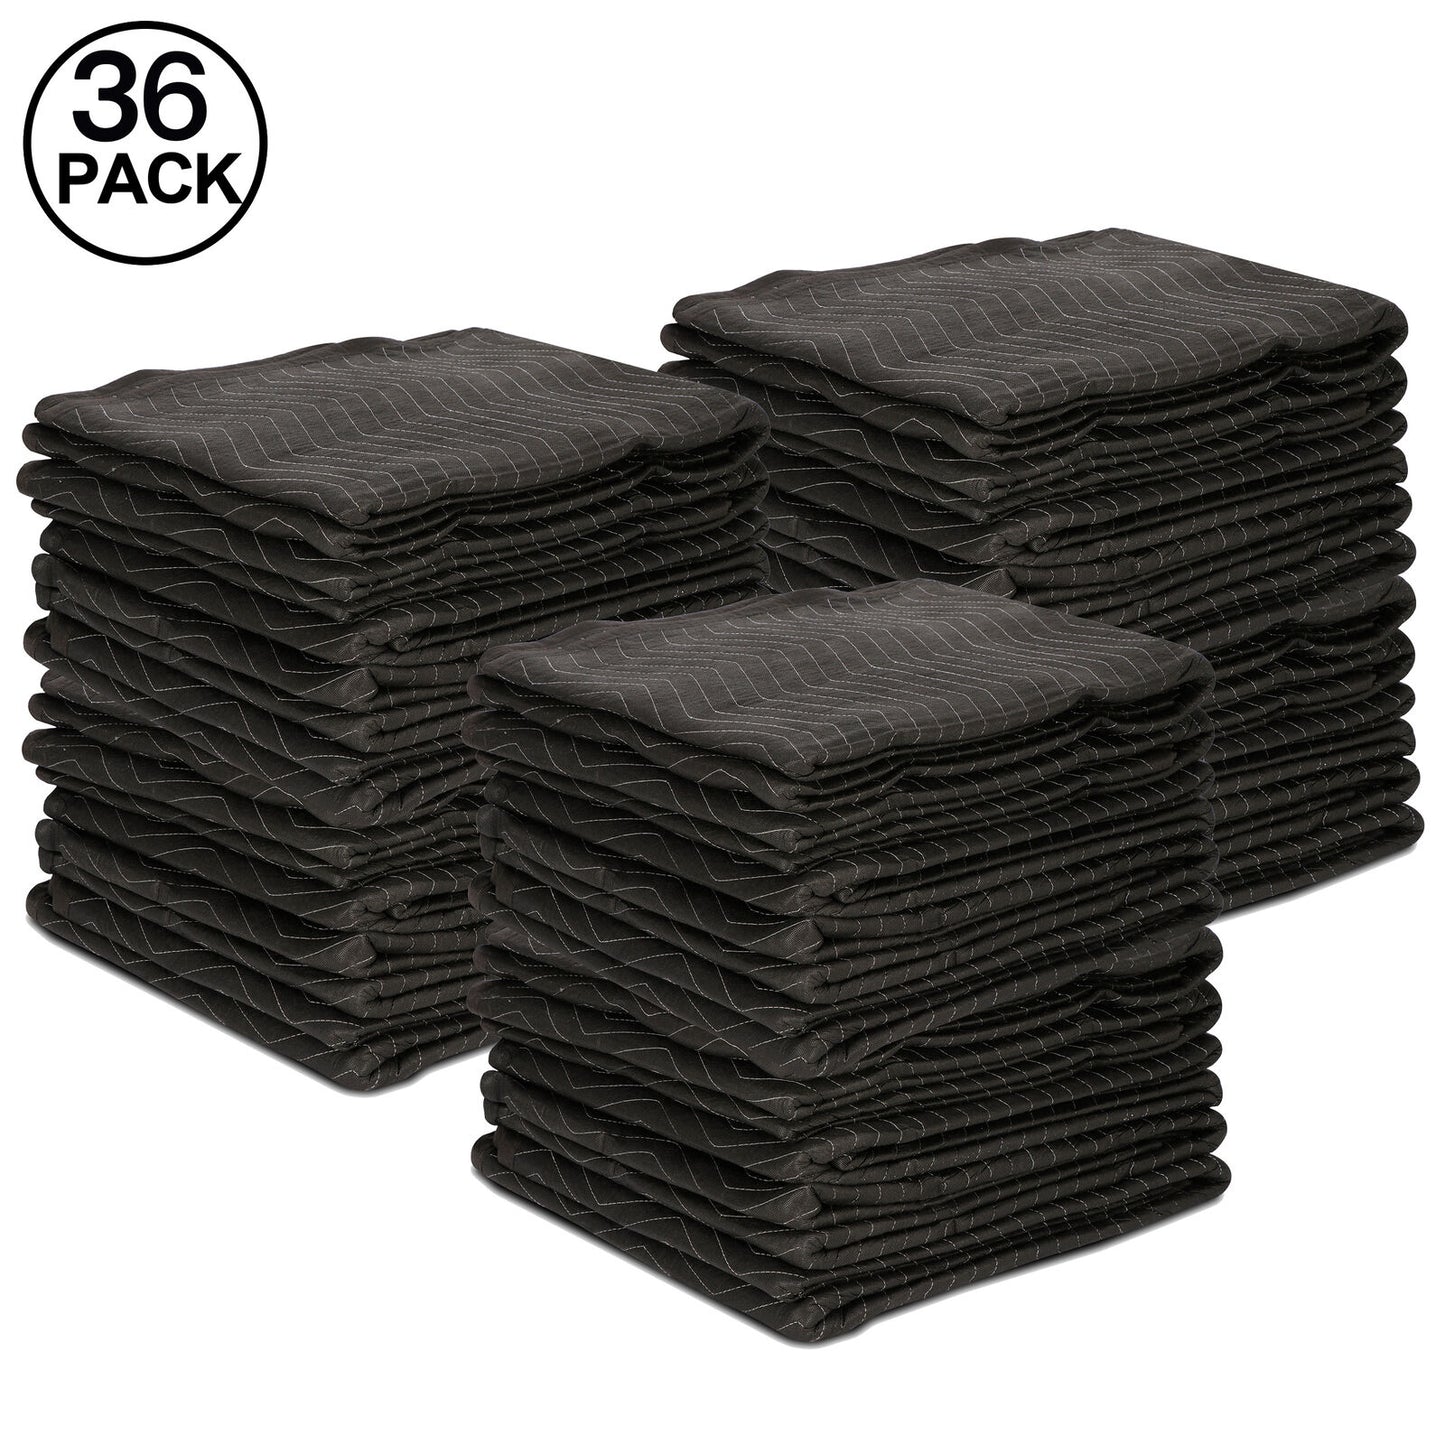 36 Pack Heavy Duty Moving Blankets 80" x 72"(65 lb/dz) Shipping Pads Ultra Thick